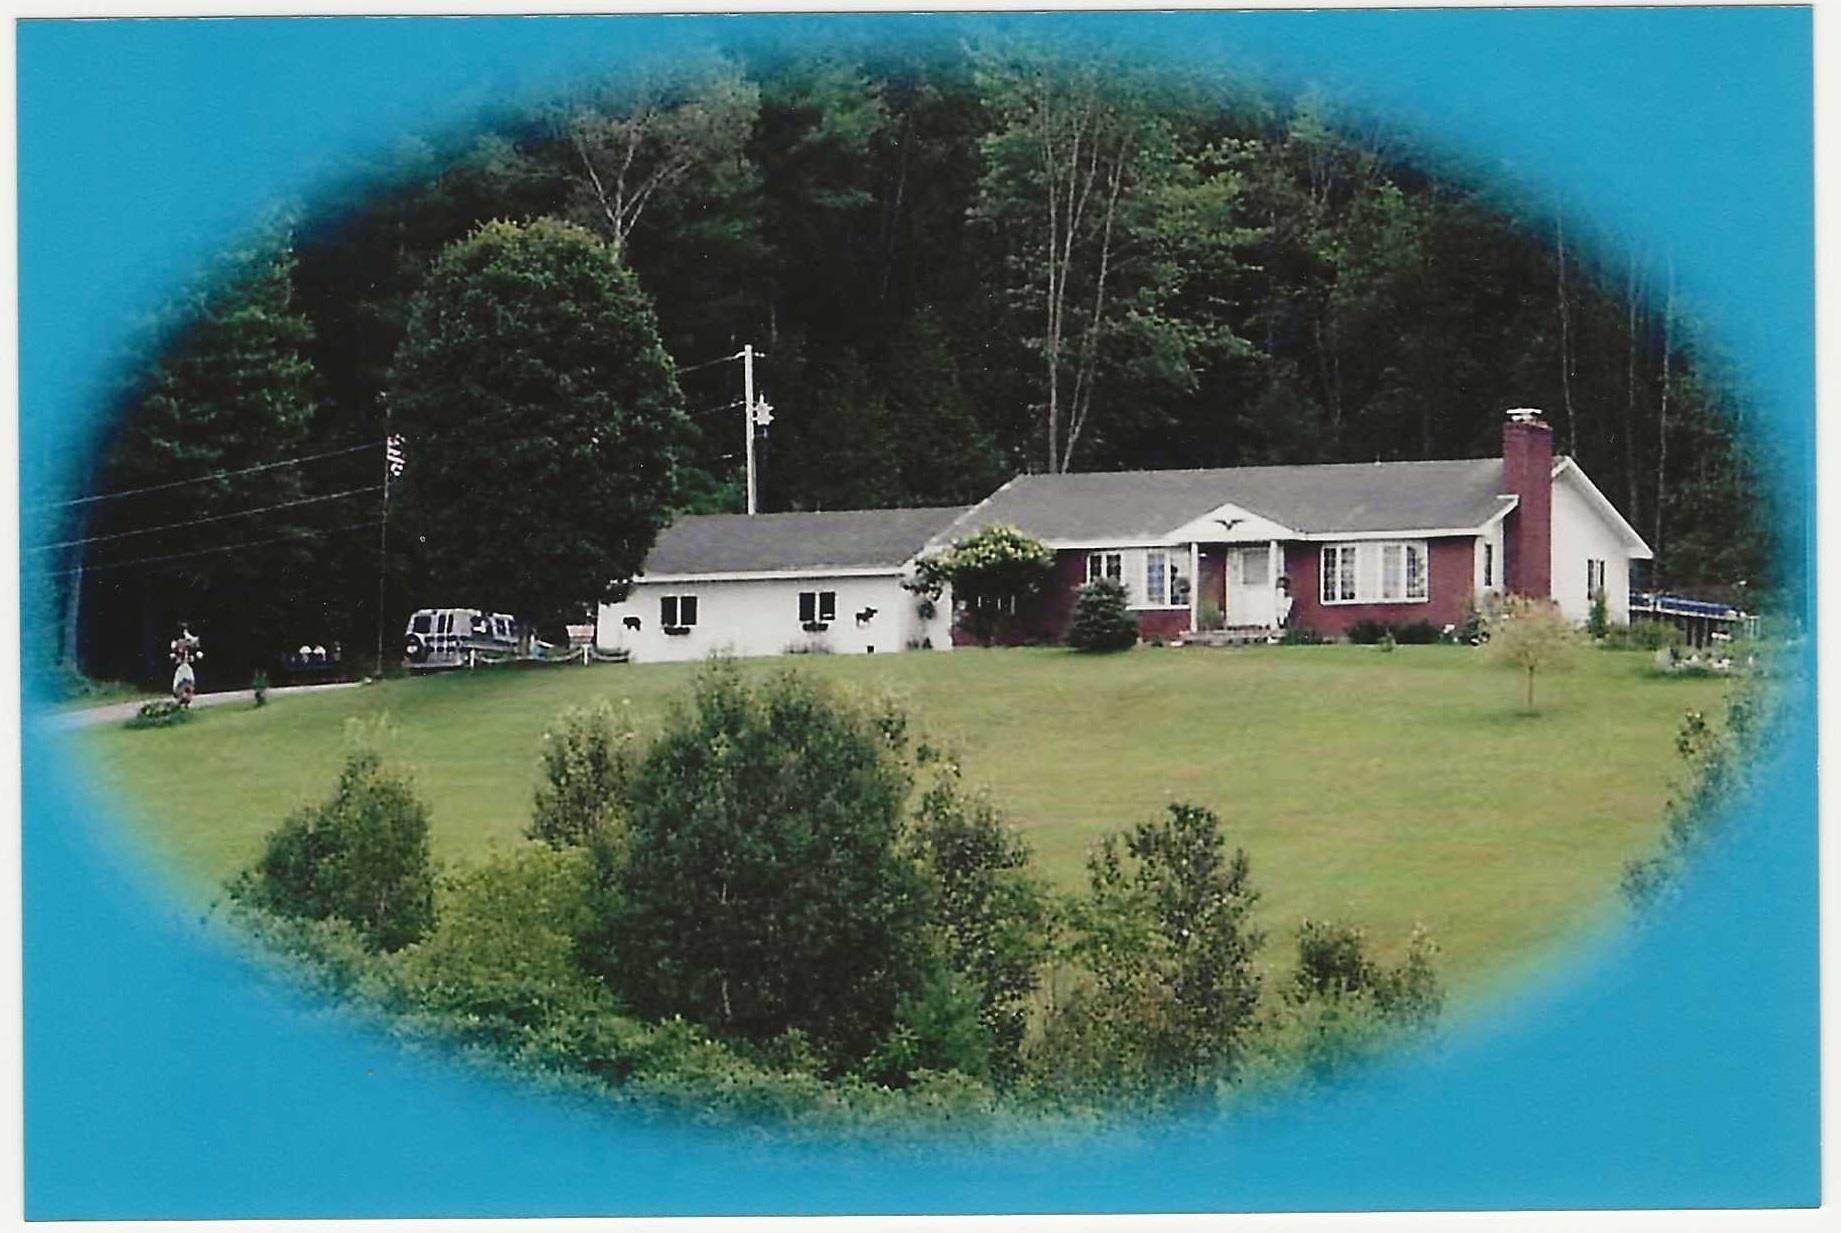 Property for Sale at Monroe, NH 03771